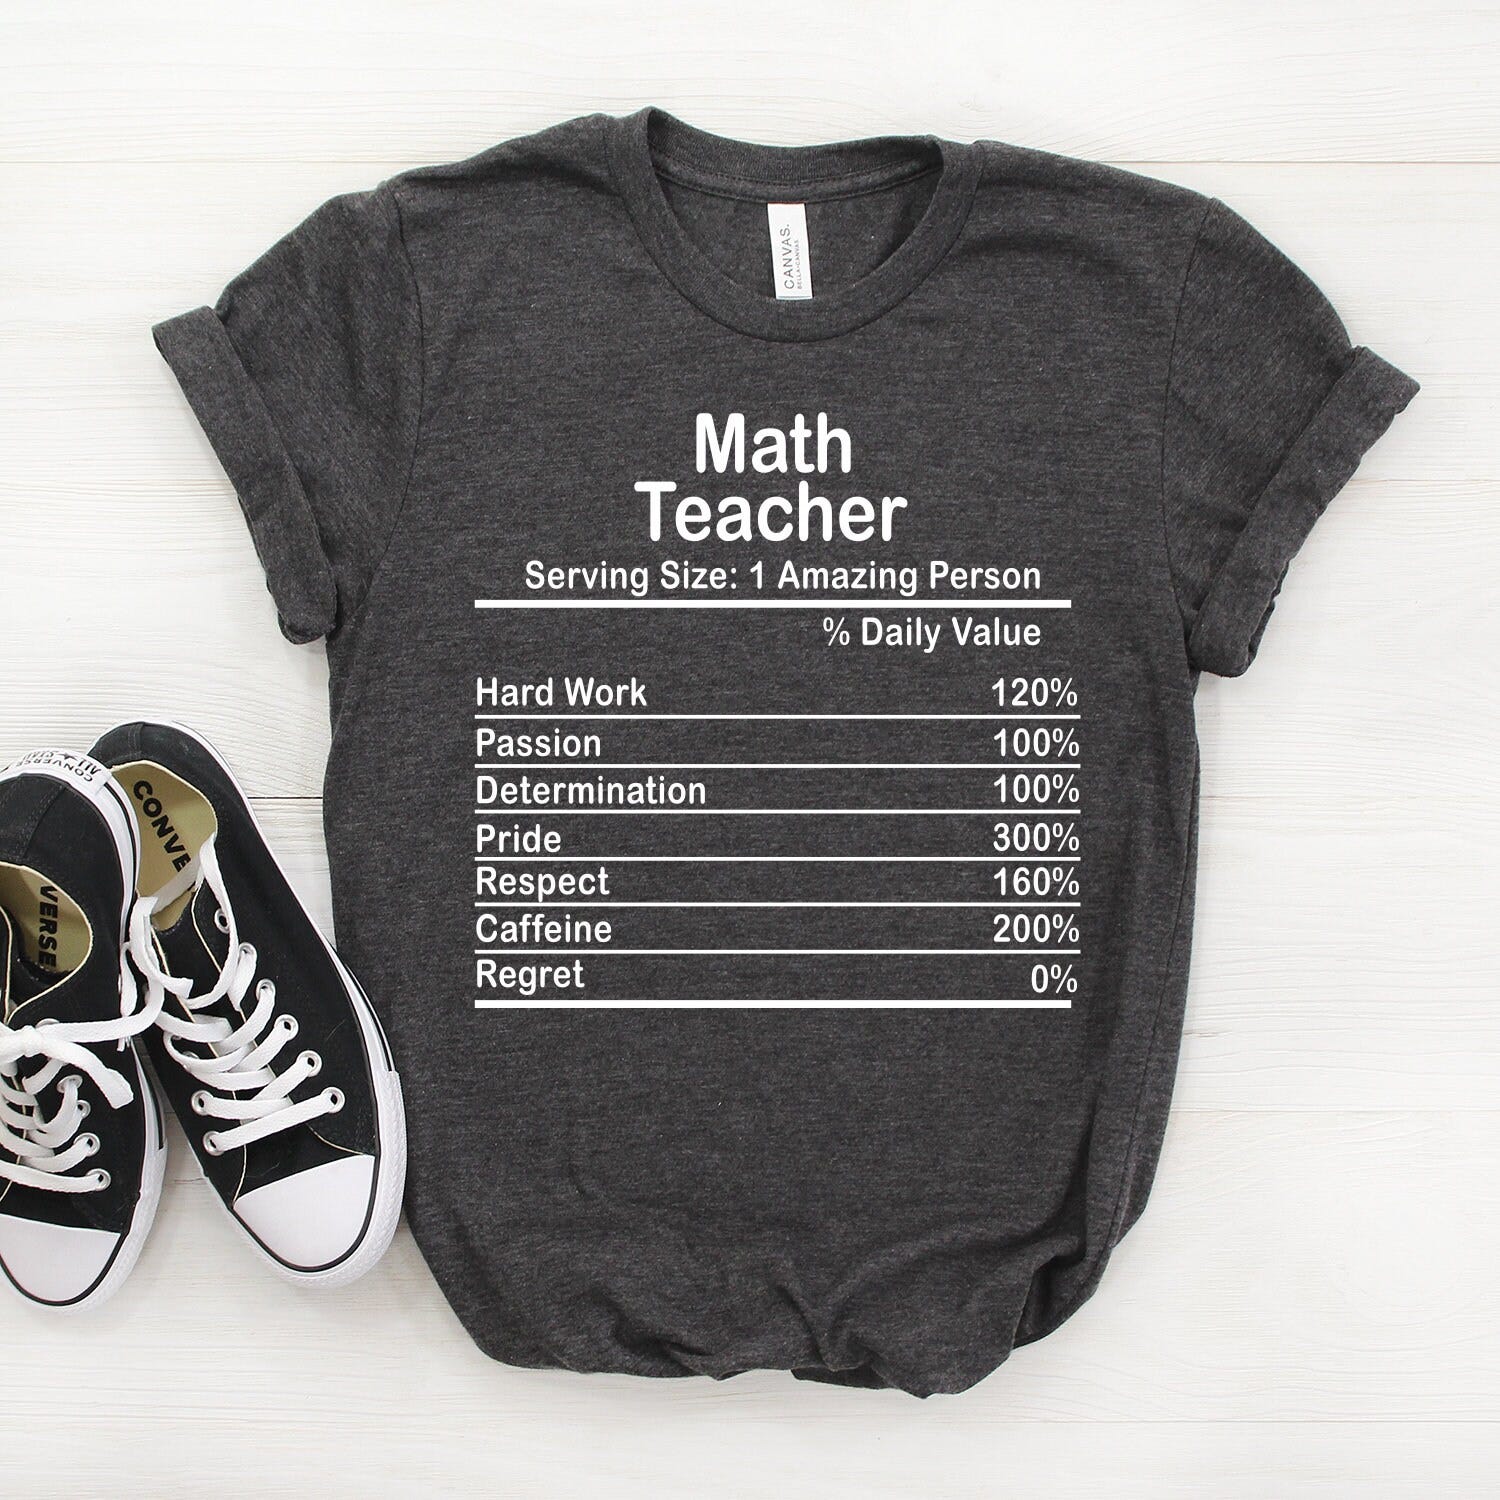 Personalized Math Teacher Nutrition Facts Shirt, Math Teacher Shirt, Math Teacher Gift, Math Teacher T shirt, Math Teacher Nutrition Facts